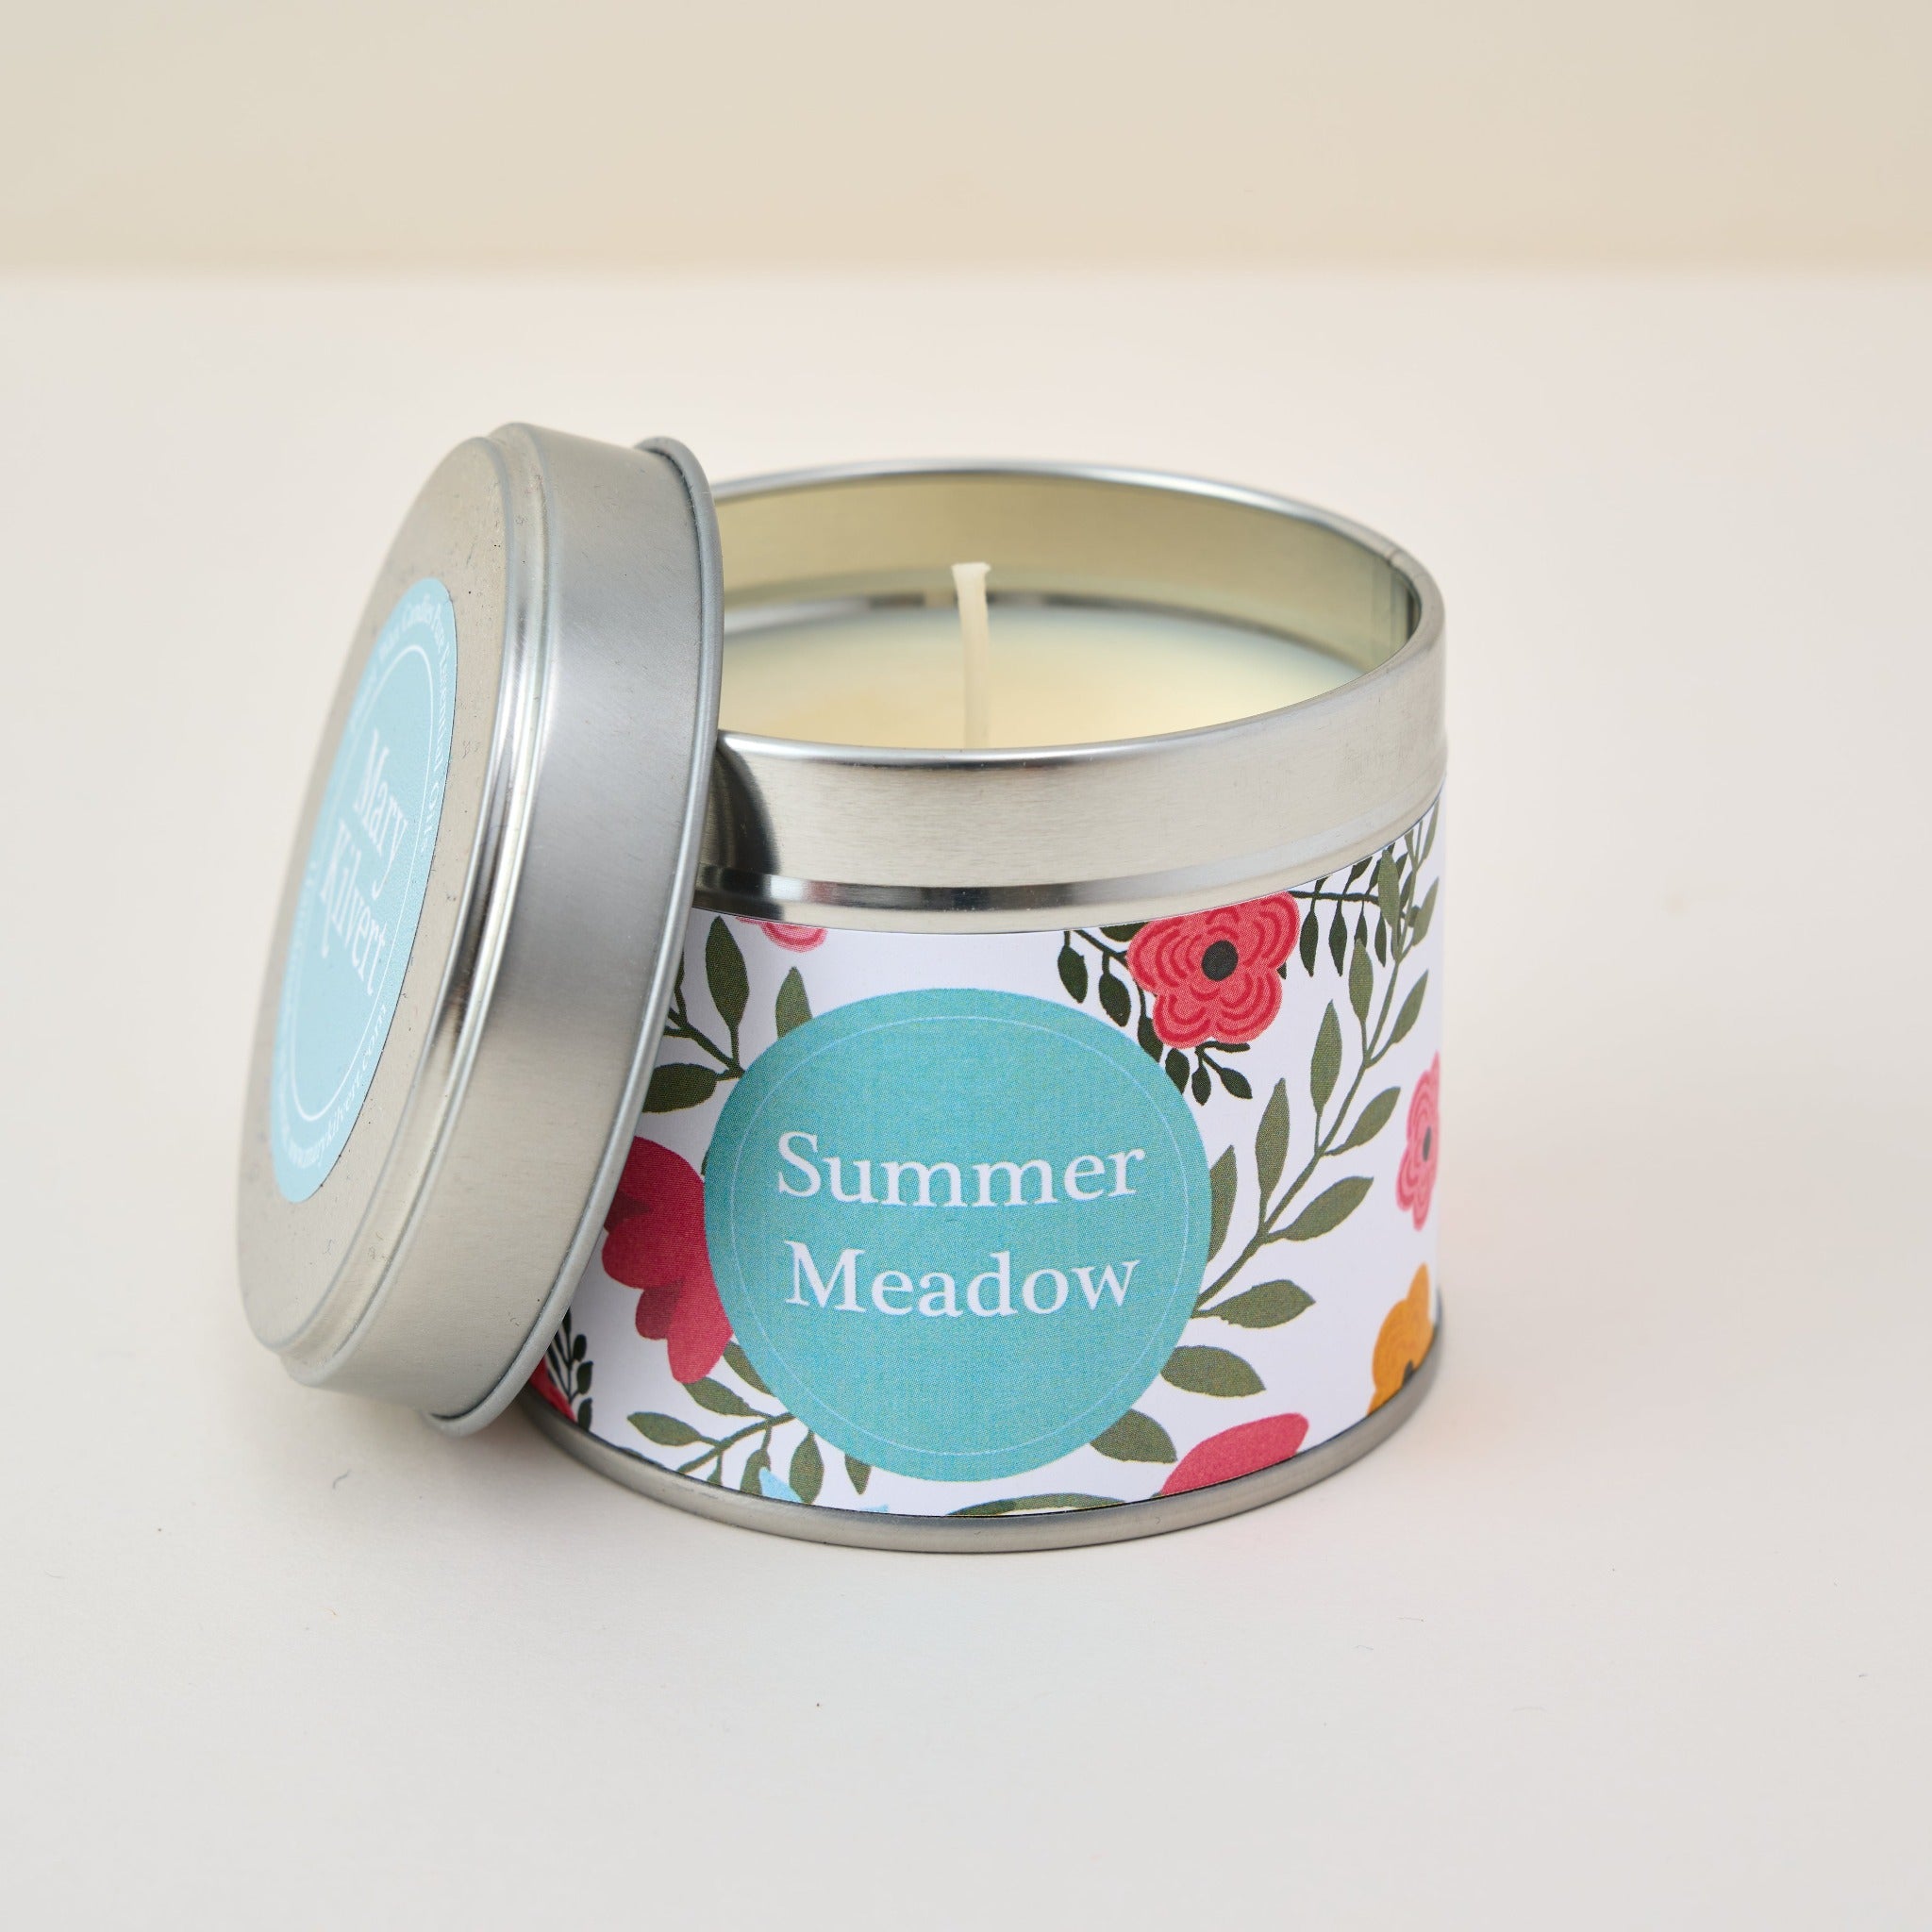 Summer Meadow Candle by Mary Kilvert